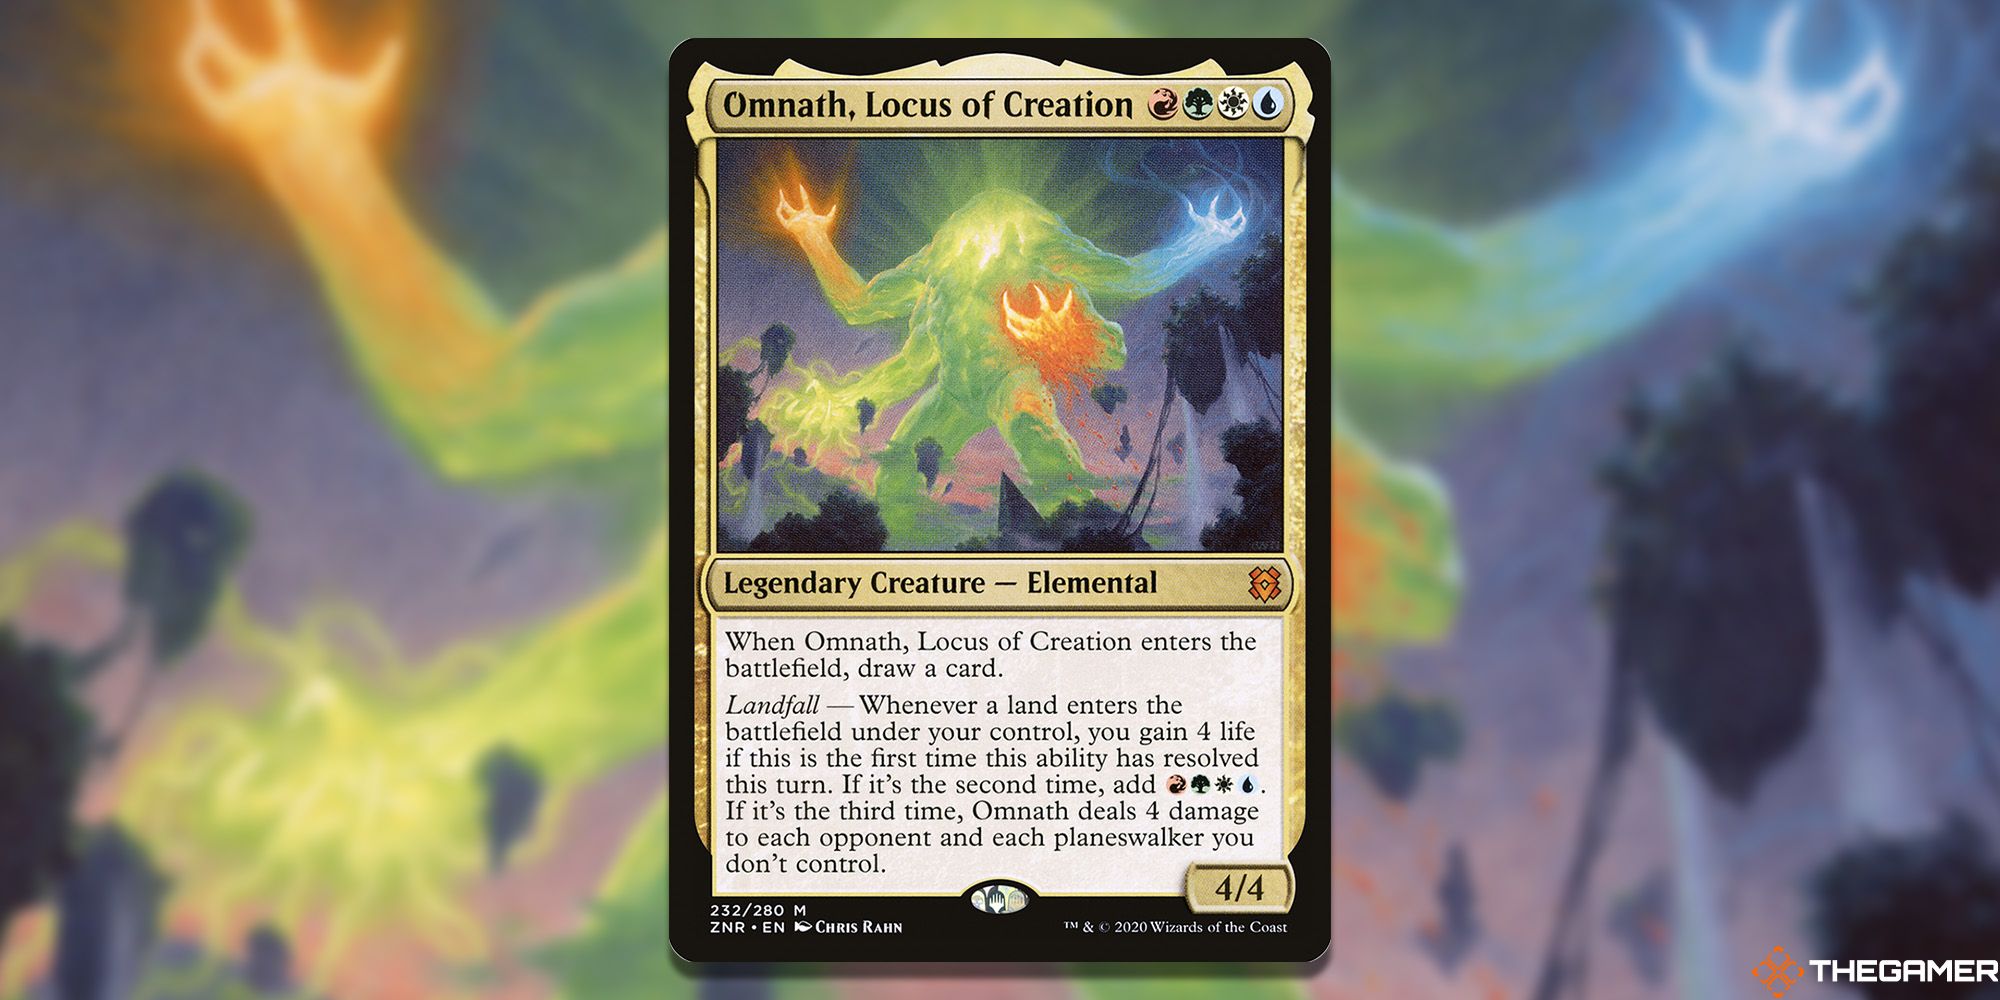 Image of the Omnath, Locus of Creation card in Magic: The Gathering, with art by Chris Rahn